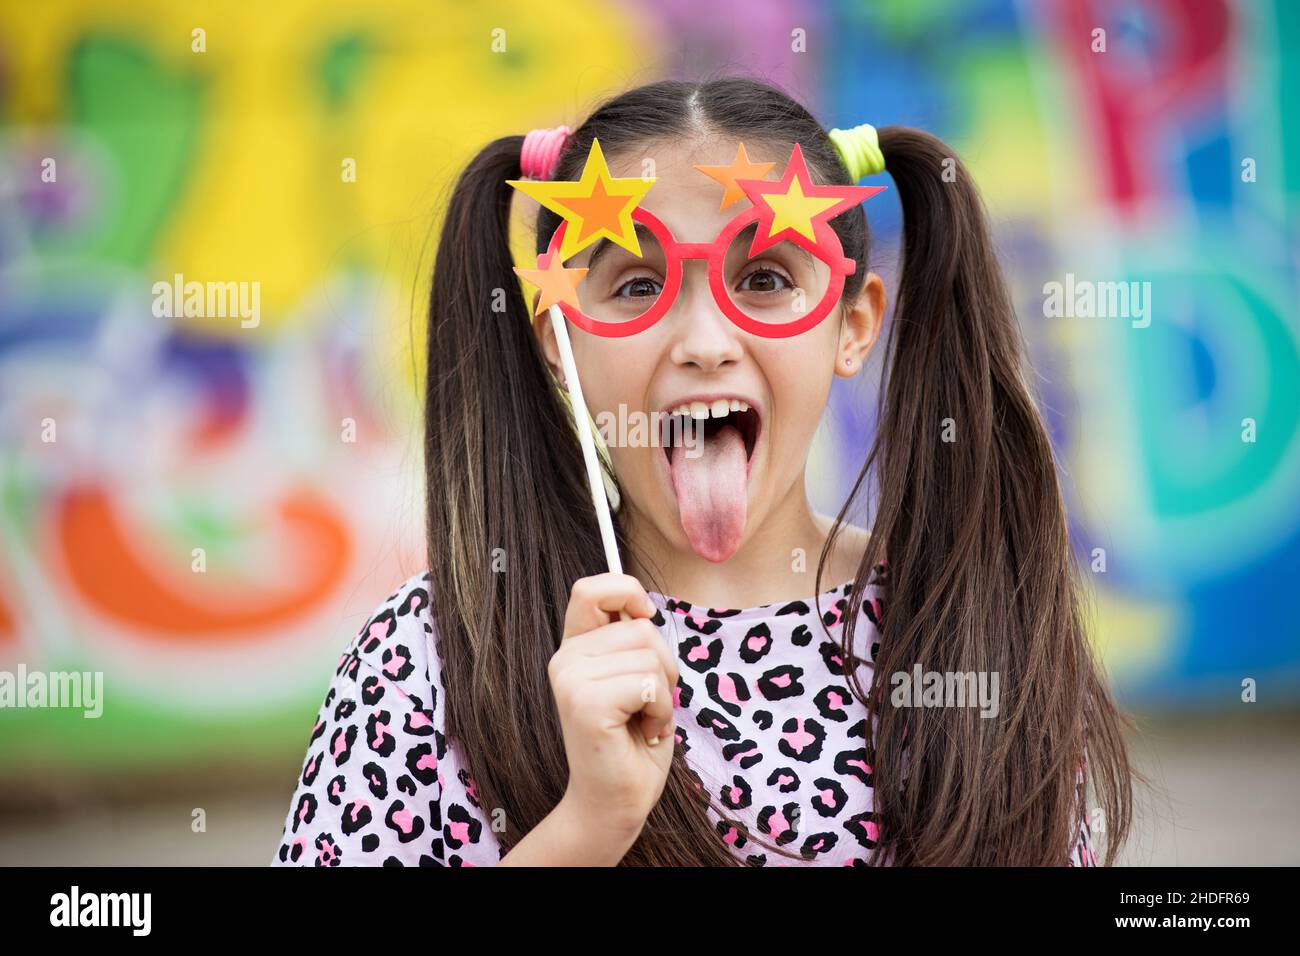 girl, fun, sticking out tongue, party glasses, girls, funs, poking tongues, sticking out tongues Stock Photo